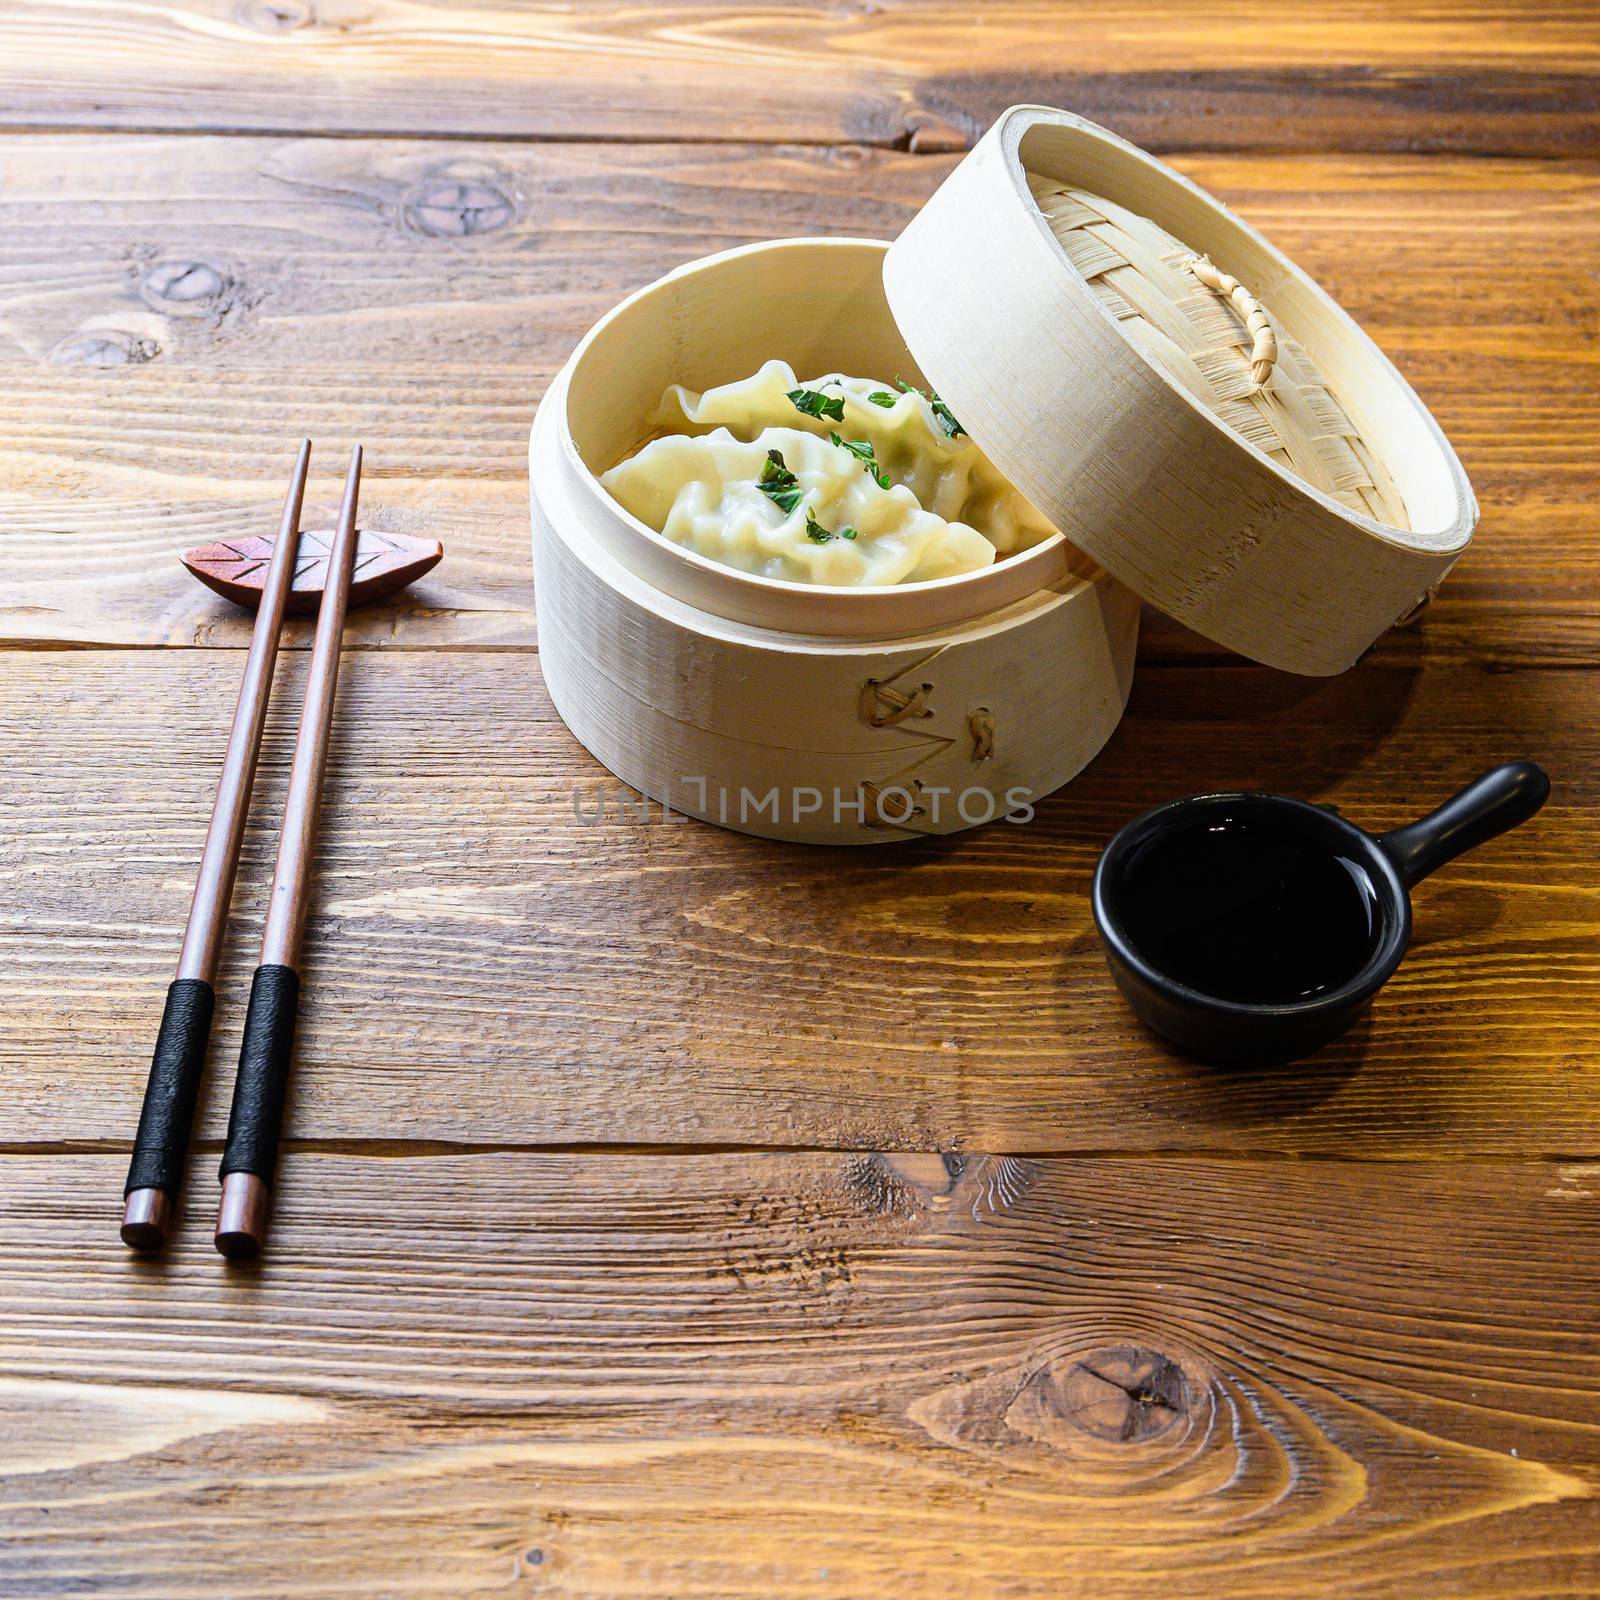 Japanese gyoza or dumplings snack with soy sauce in wooden steamer on wood japan table side view